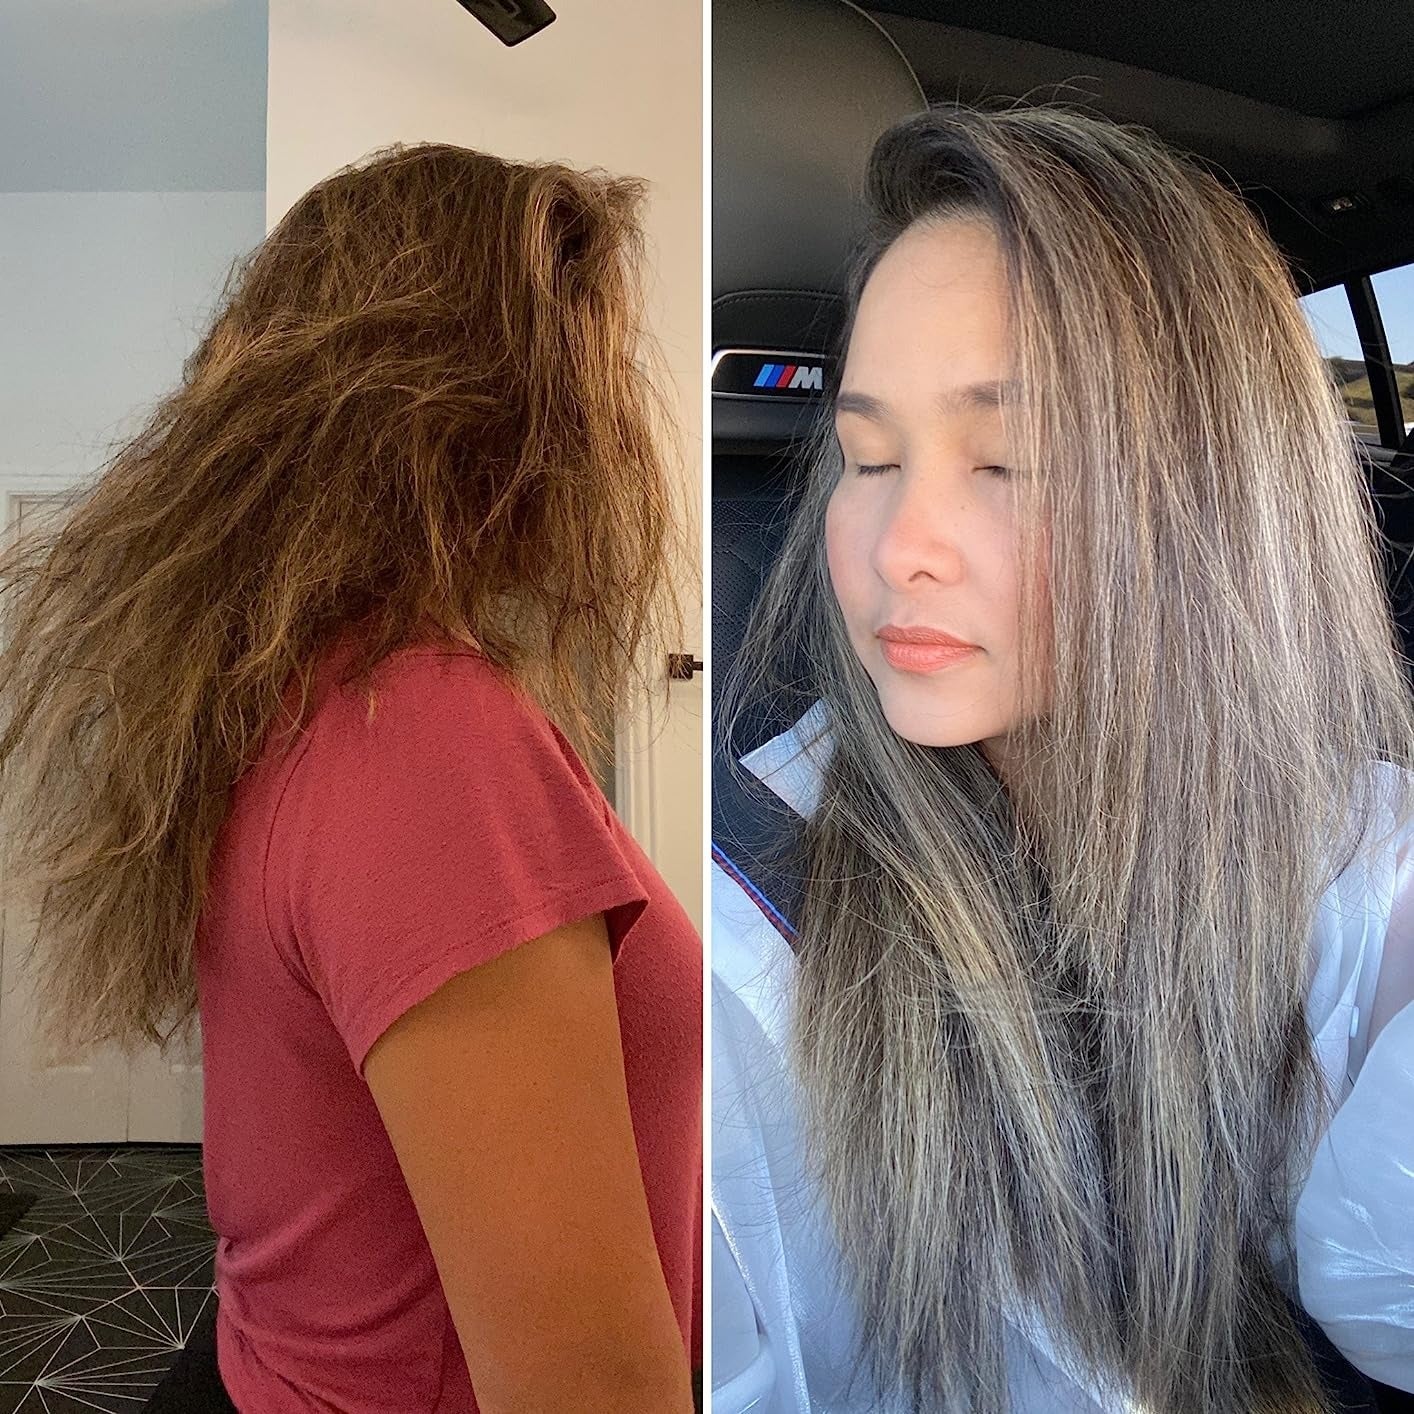 The reviewer before and after using the hair treatment